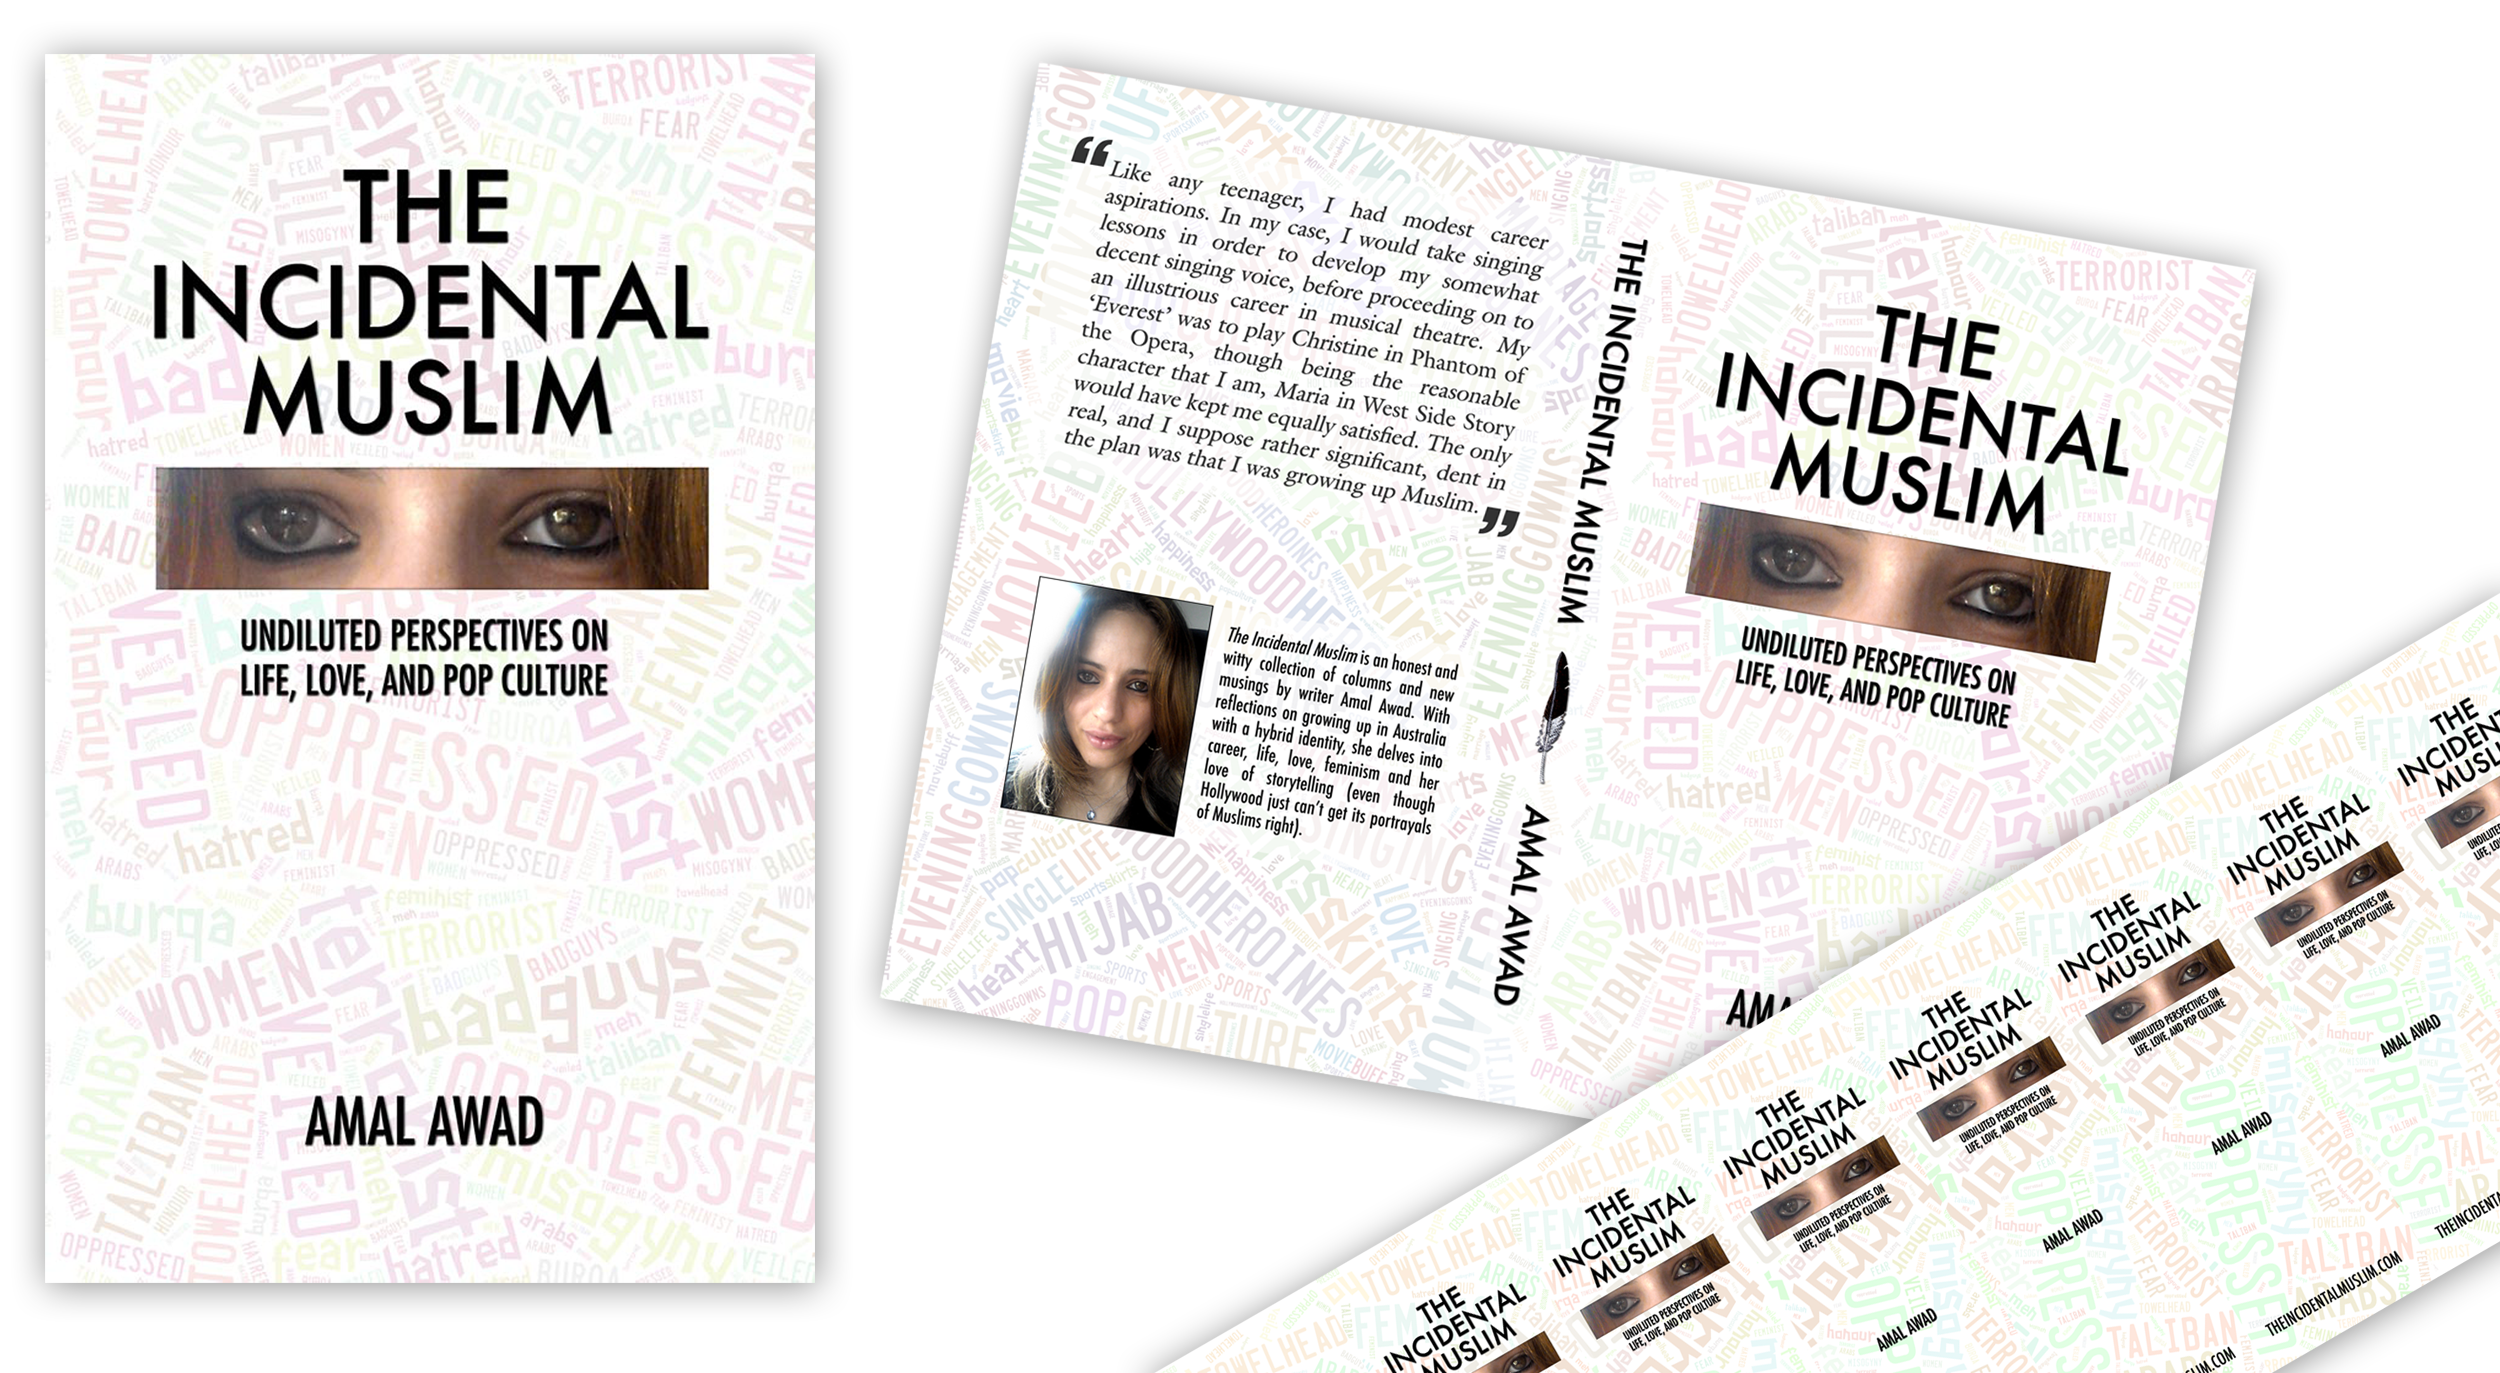 Amal Awad 'The Incidental Muslim' book cover and bookmarks